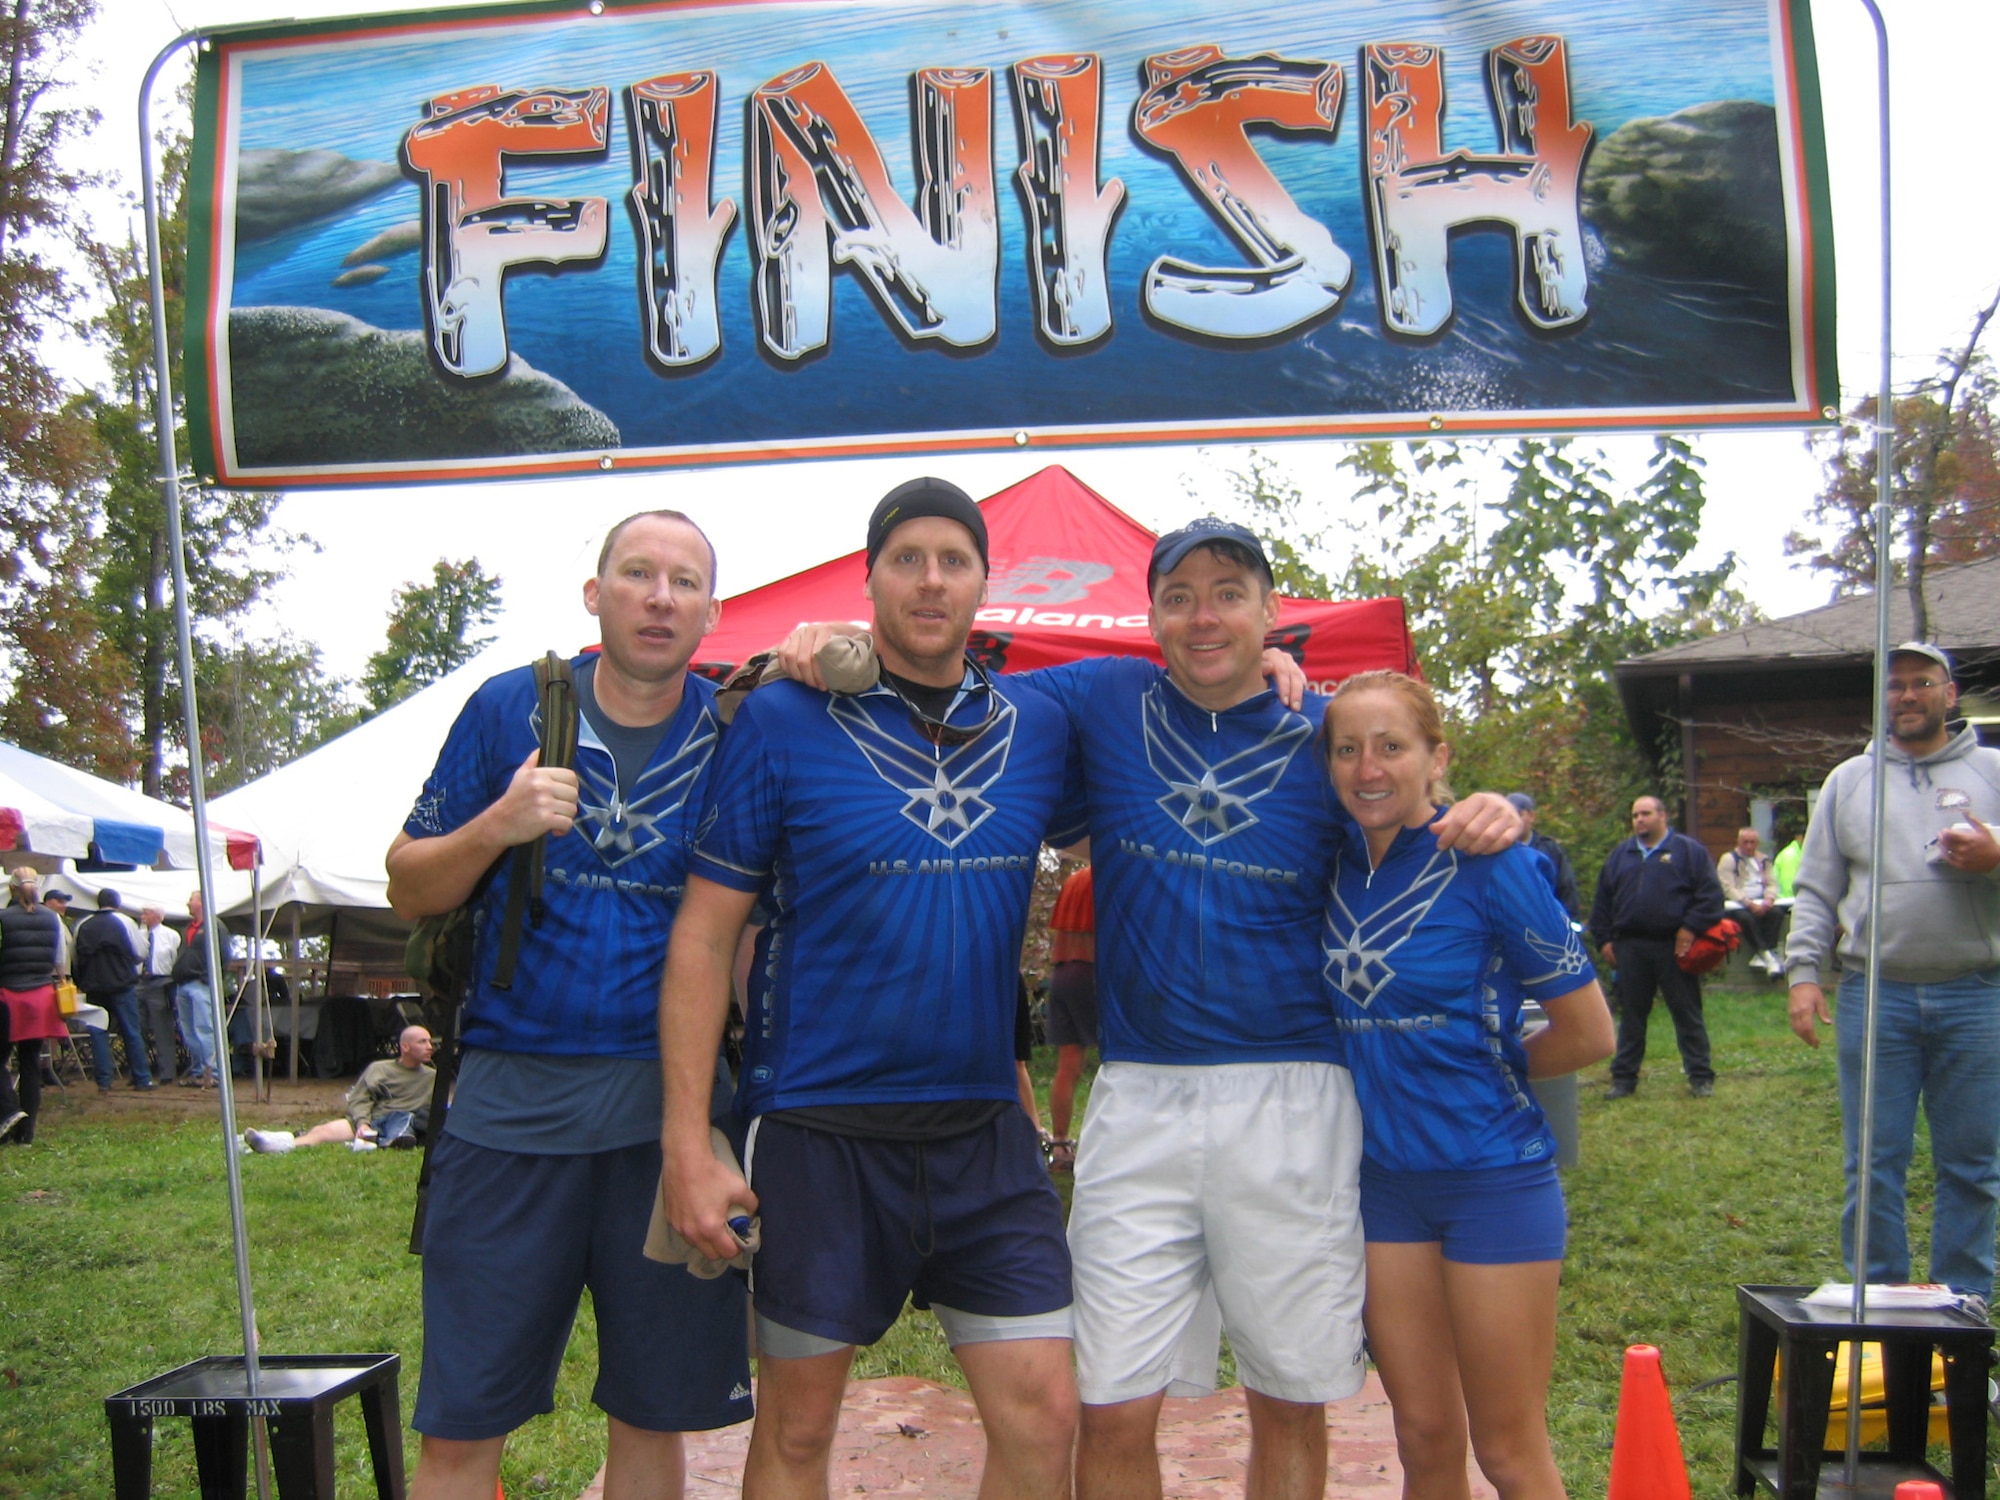 Gene Vesey, Dick Fulton, Mike Sonderman and Randi Miles, members of the DFASt Wilderness Challenge team, pose at the finish line Oct. 7 after the two-day, 53-mile 6-event military adventure race. Vesey, Fulton and Sonderman are part of the Defense Finance Accounting Service crew, while Miles is a member of the 460th Comptroller Squadron. They placed first out of the five Air Force teams and 16th out of the 51 teams that competed.